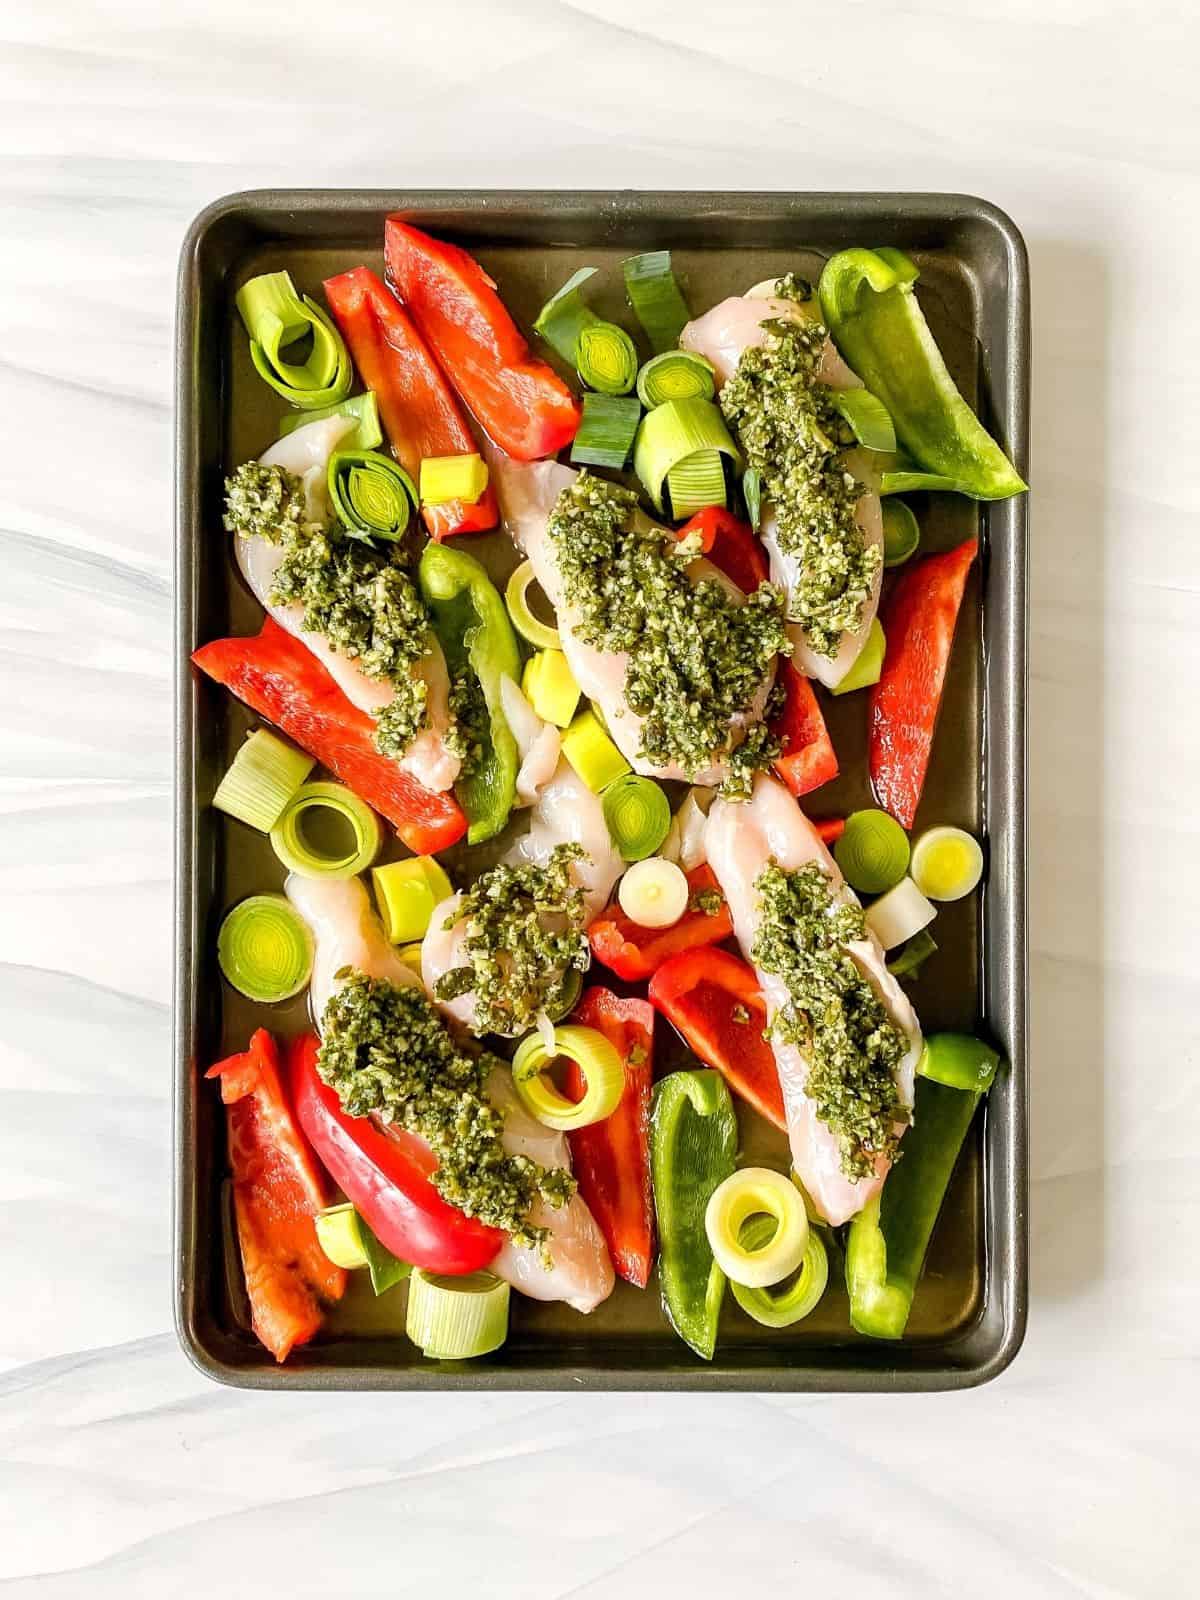 vegetables and pesto coated chicken breasts on a baking tray.